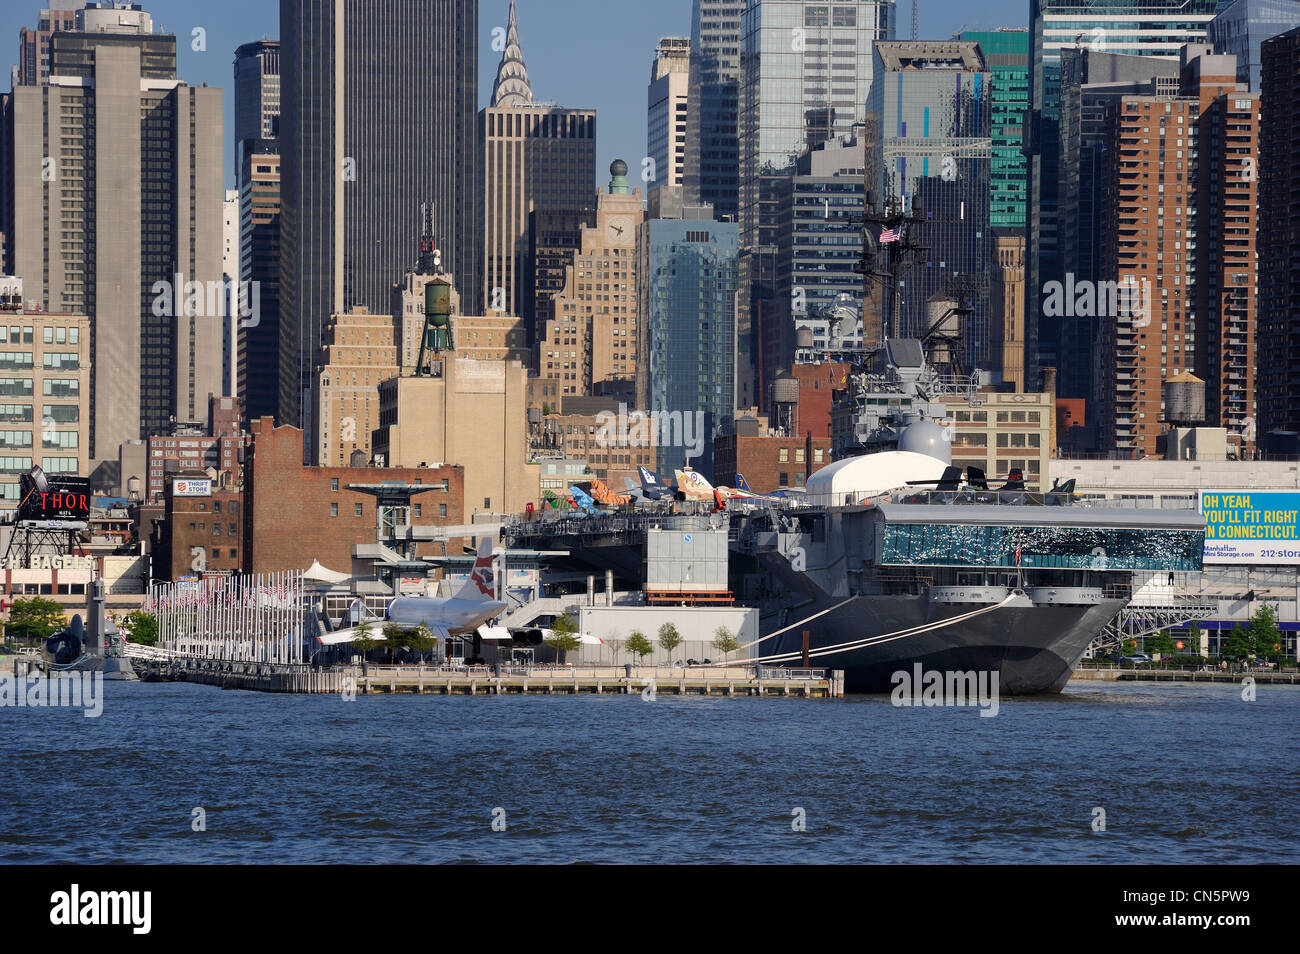 United States, New York City, Manhattan, the aircraft carrier USS Intrepid CV-11 at the Intrepid Museum, located on the Pier 86 Stock Photo